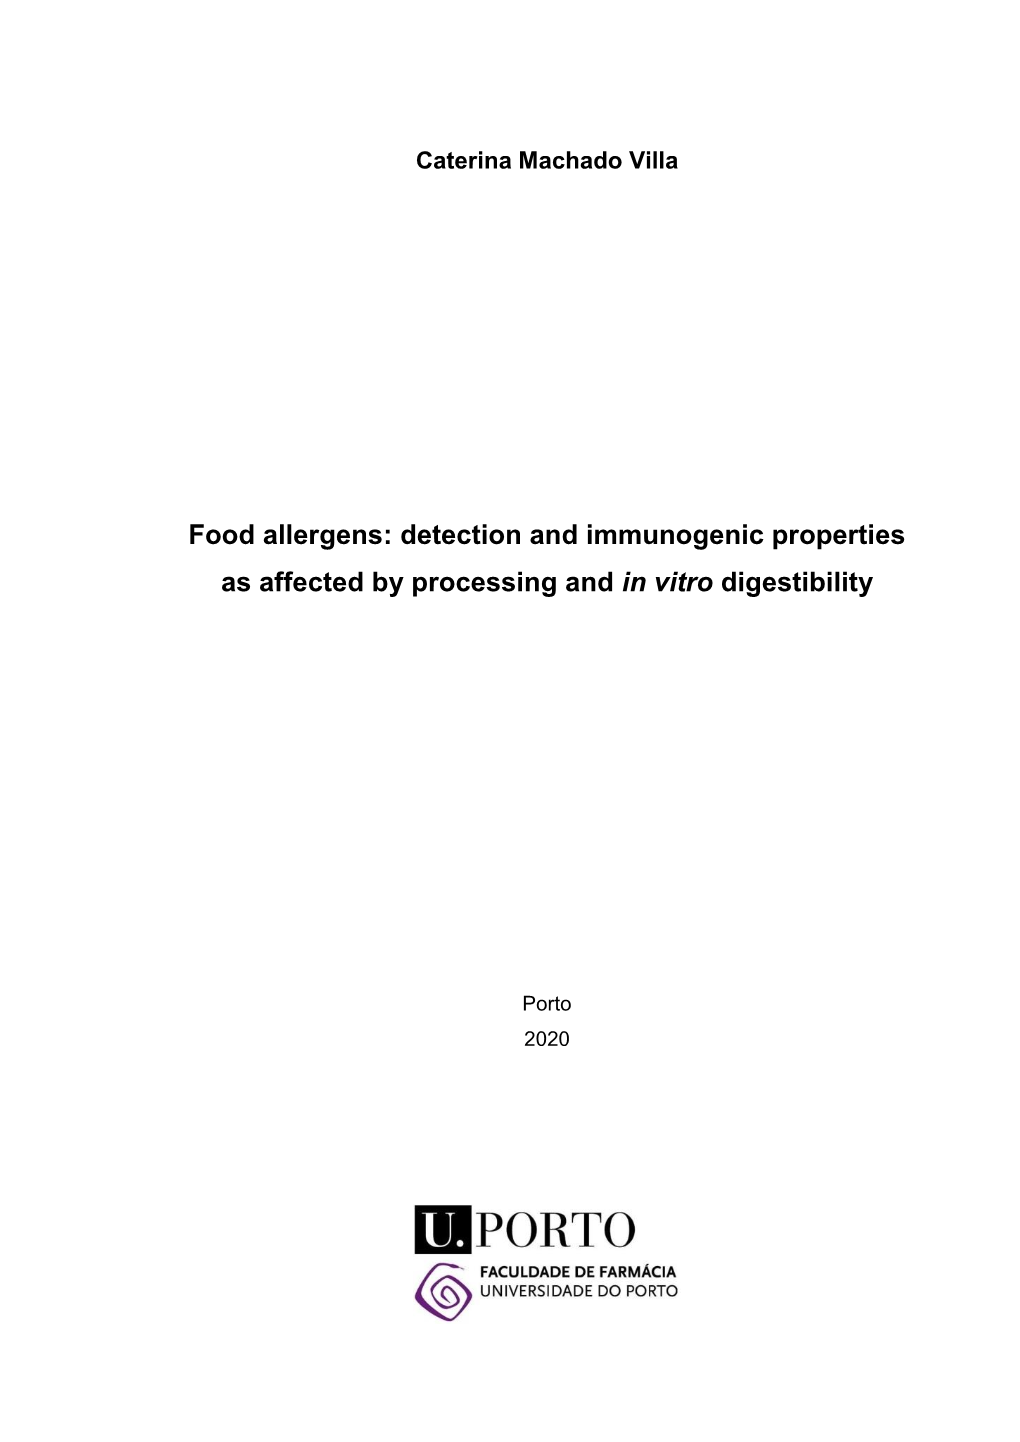 Food Allergens: Detection and Immunogenic Properties As Affected by Processing and in Vitro Digestibility